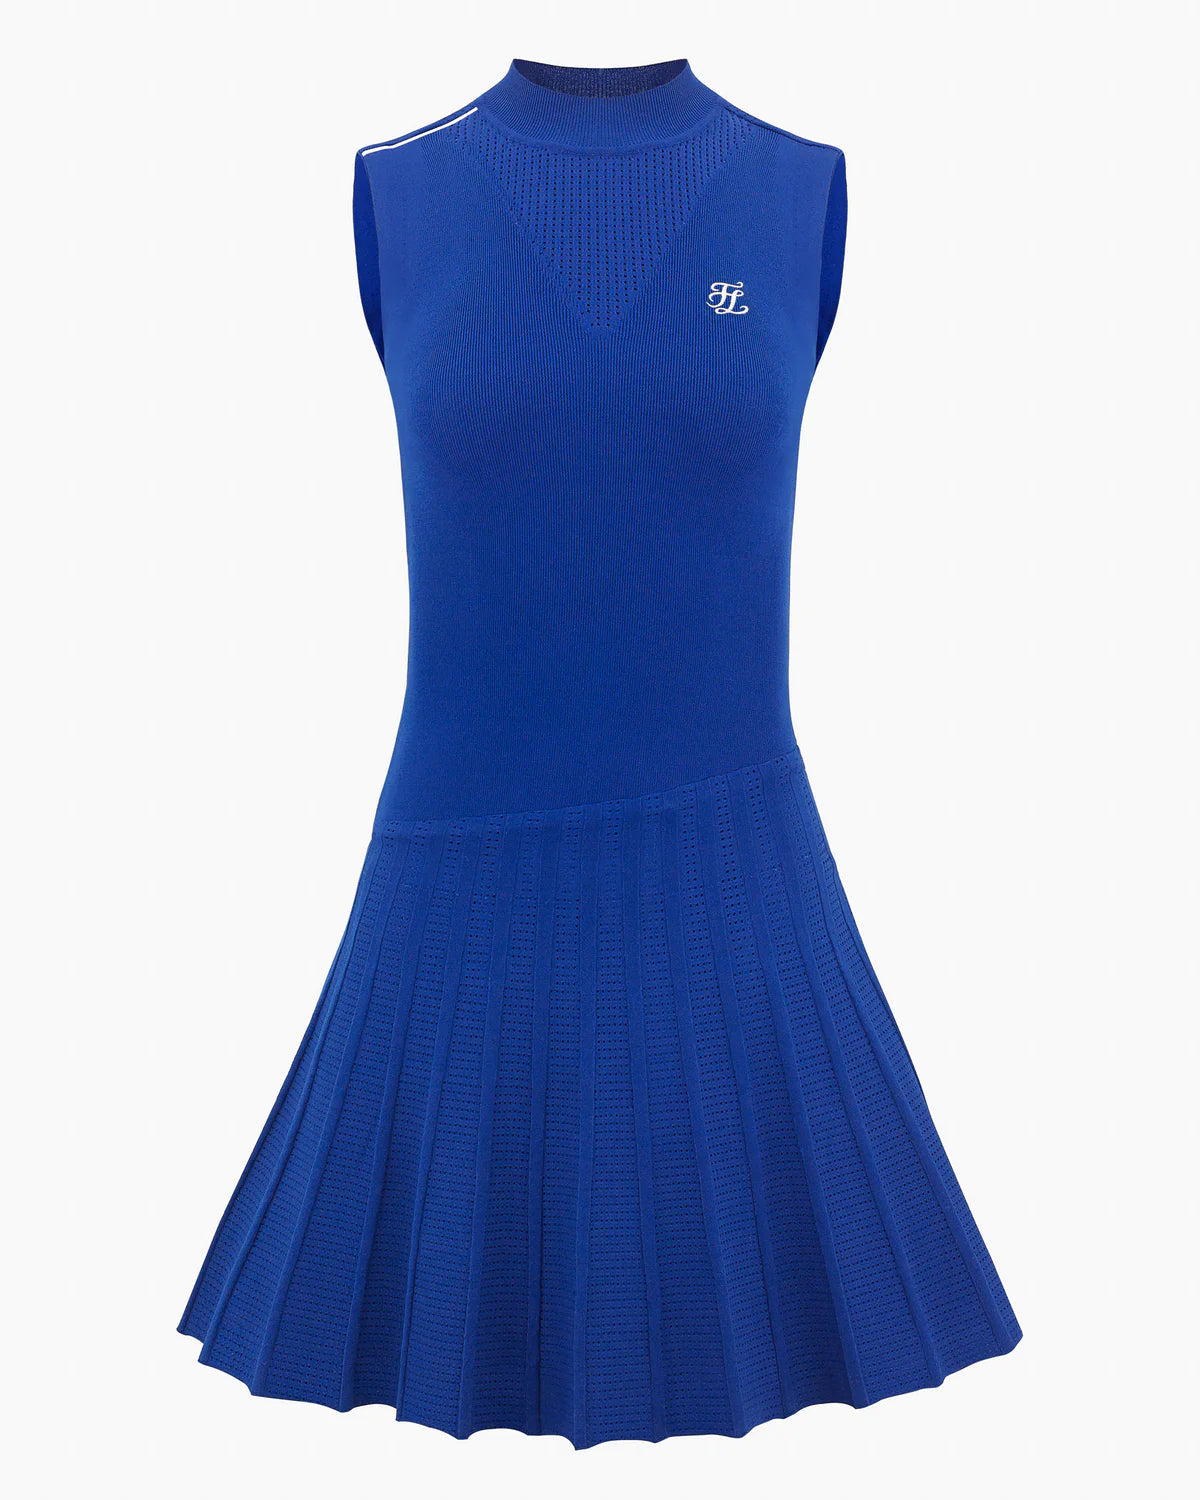 FAIRLIAR 23SS PUNCHED SLEEVELESS KNIT DRESS BLUE